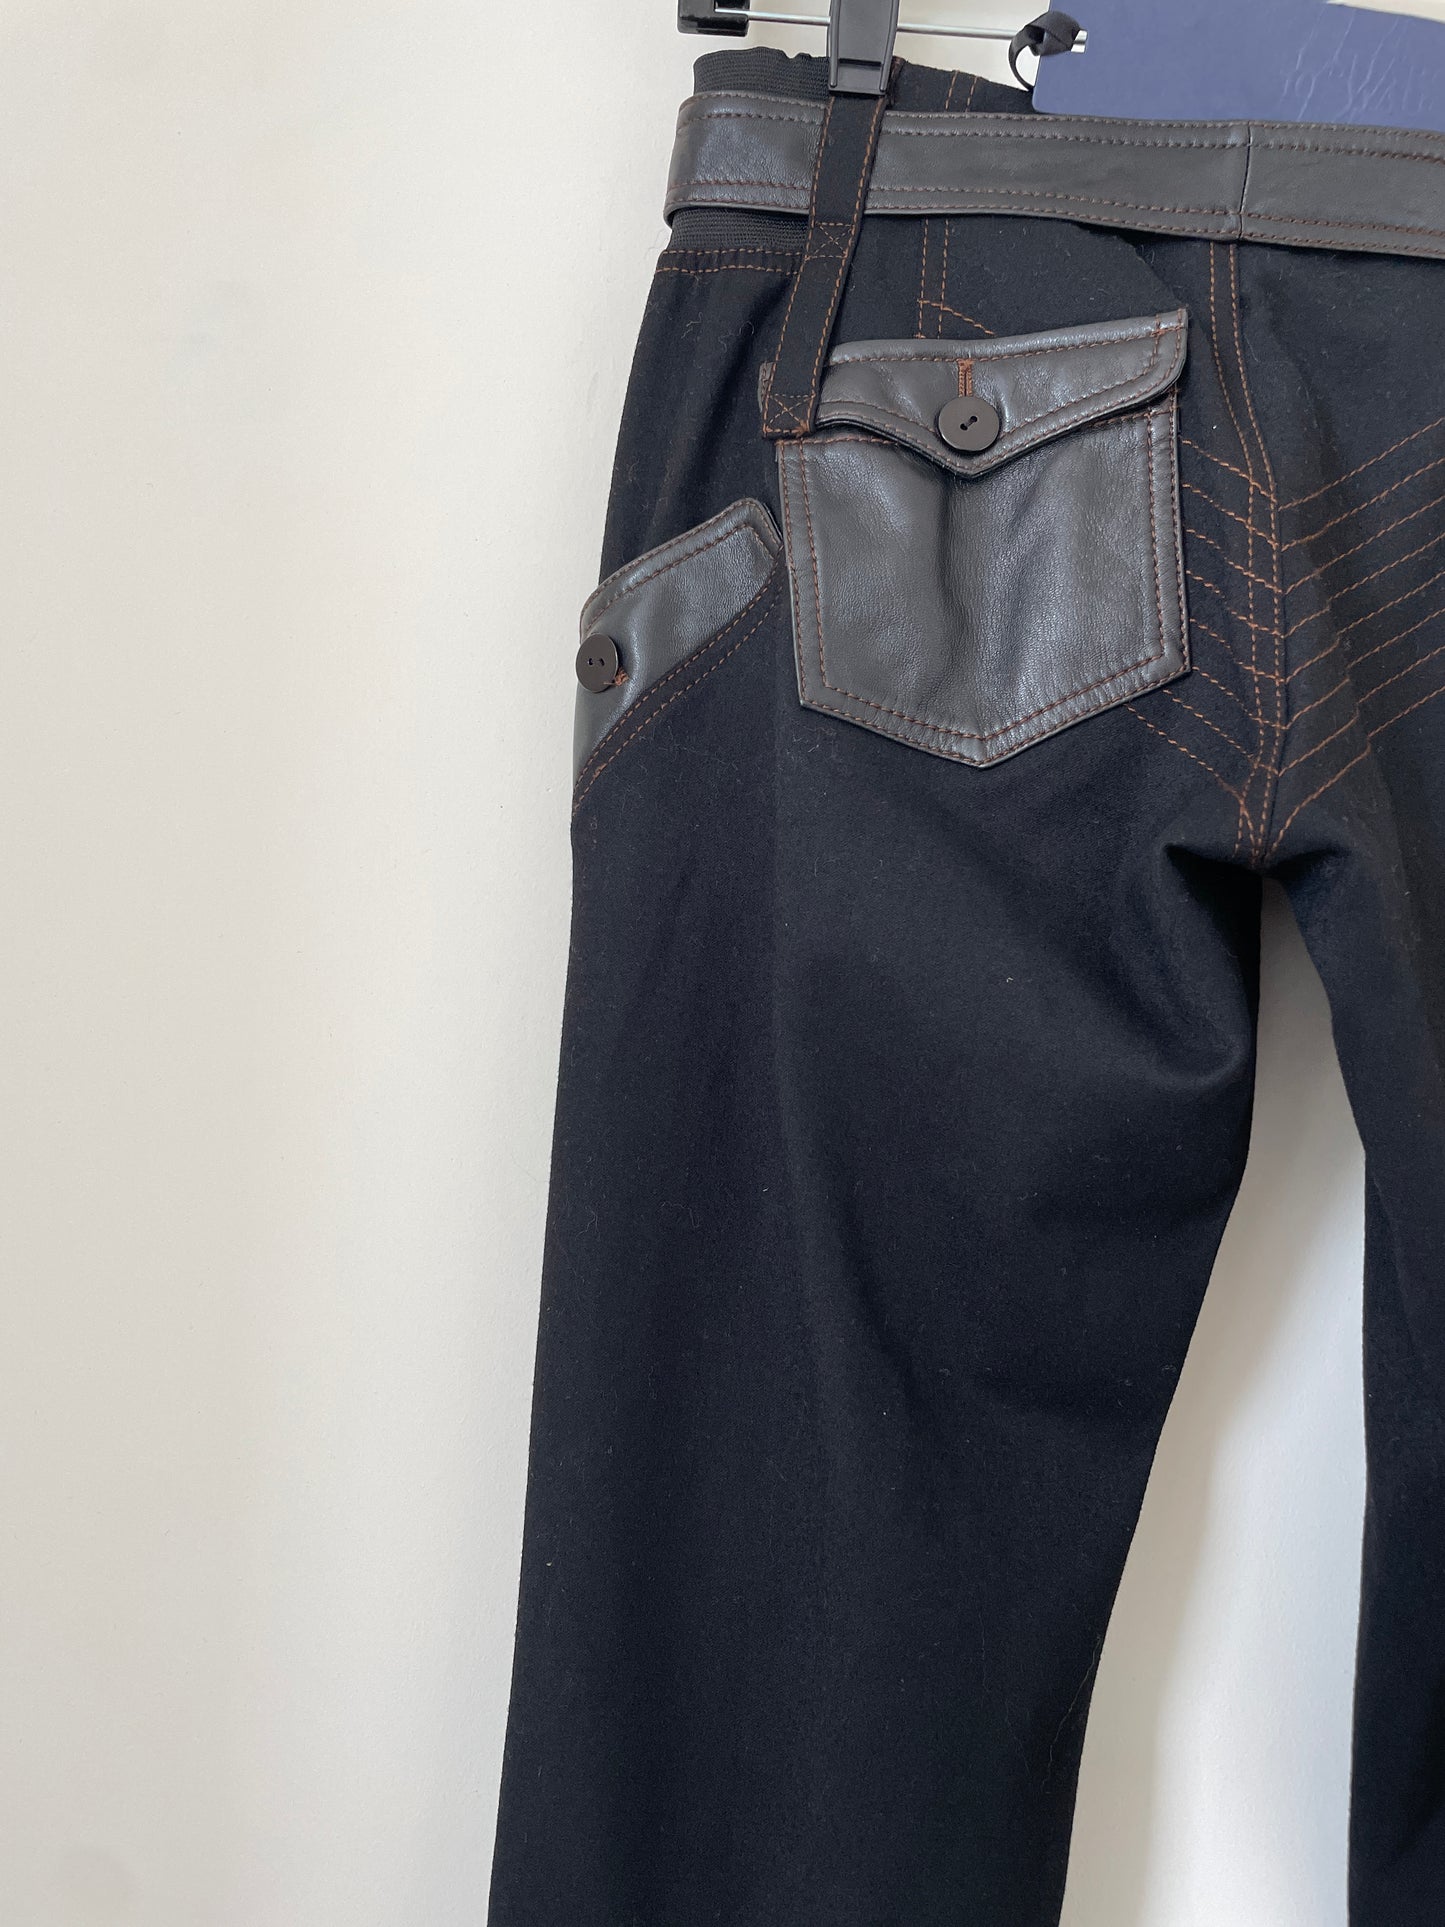 Sharon Wauchob 2000's stretch black low waisted pants with leather pockets and belt